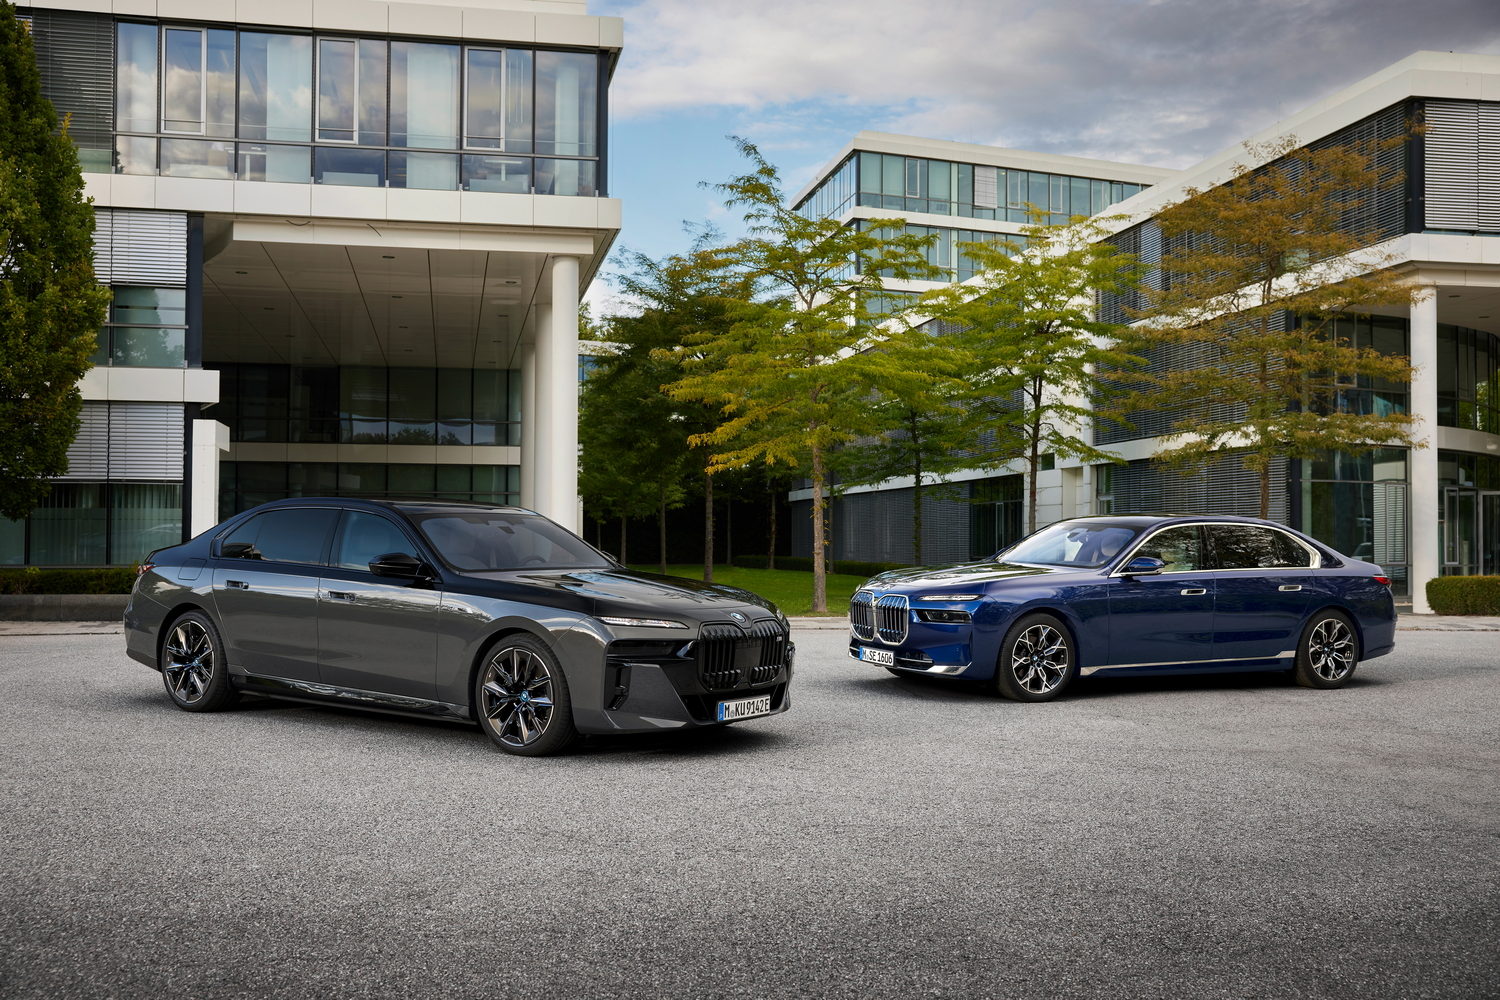 BMW 7 Series hybrids coming in 2023